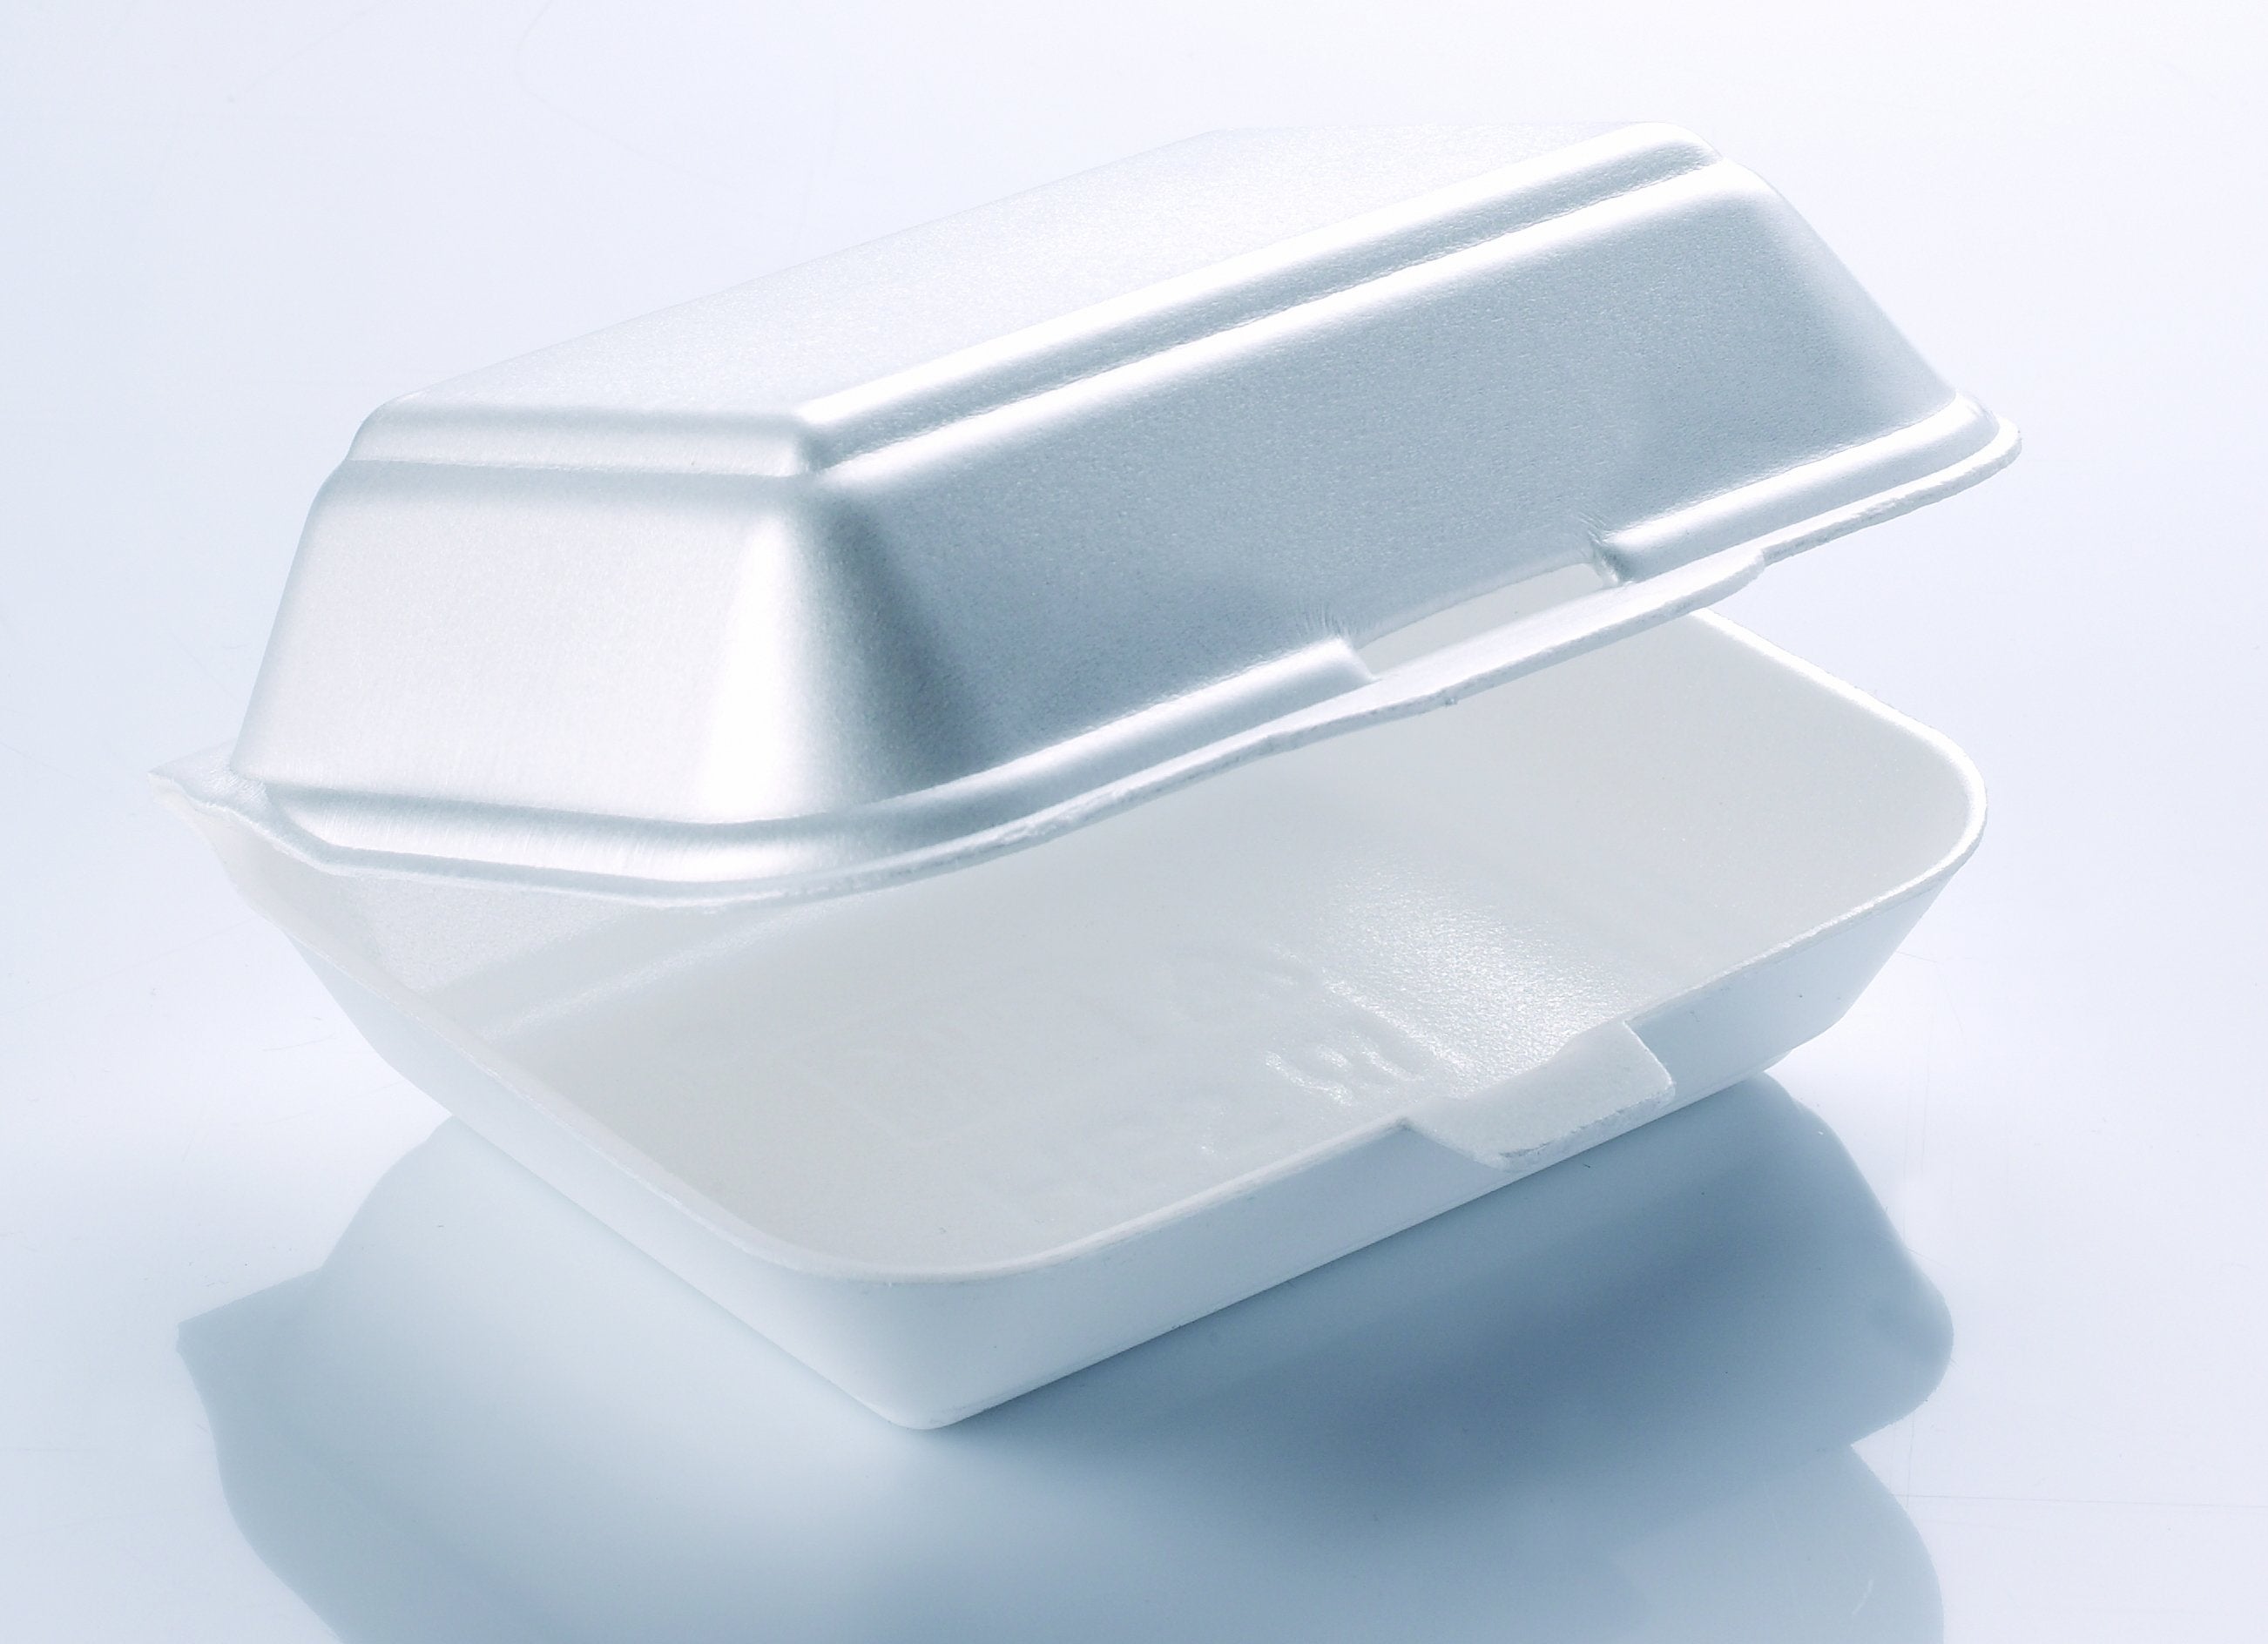 HP2 White Foam Meal Boxes - Gafbros